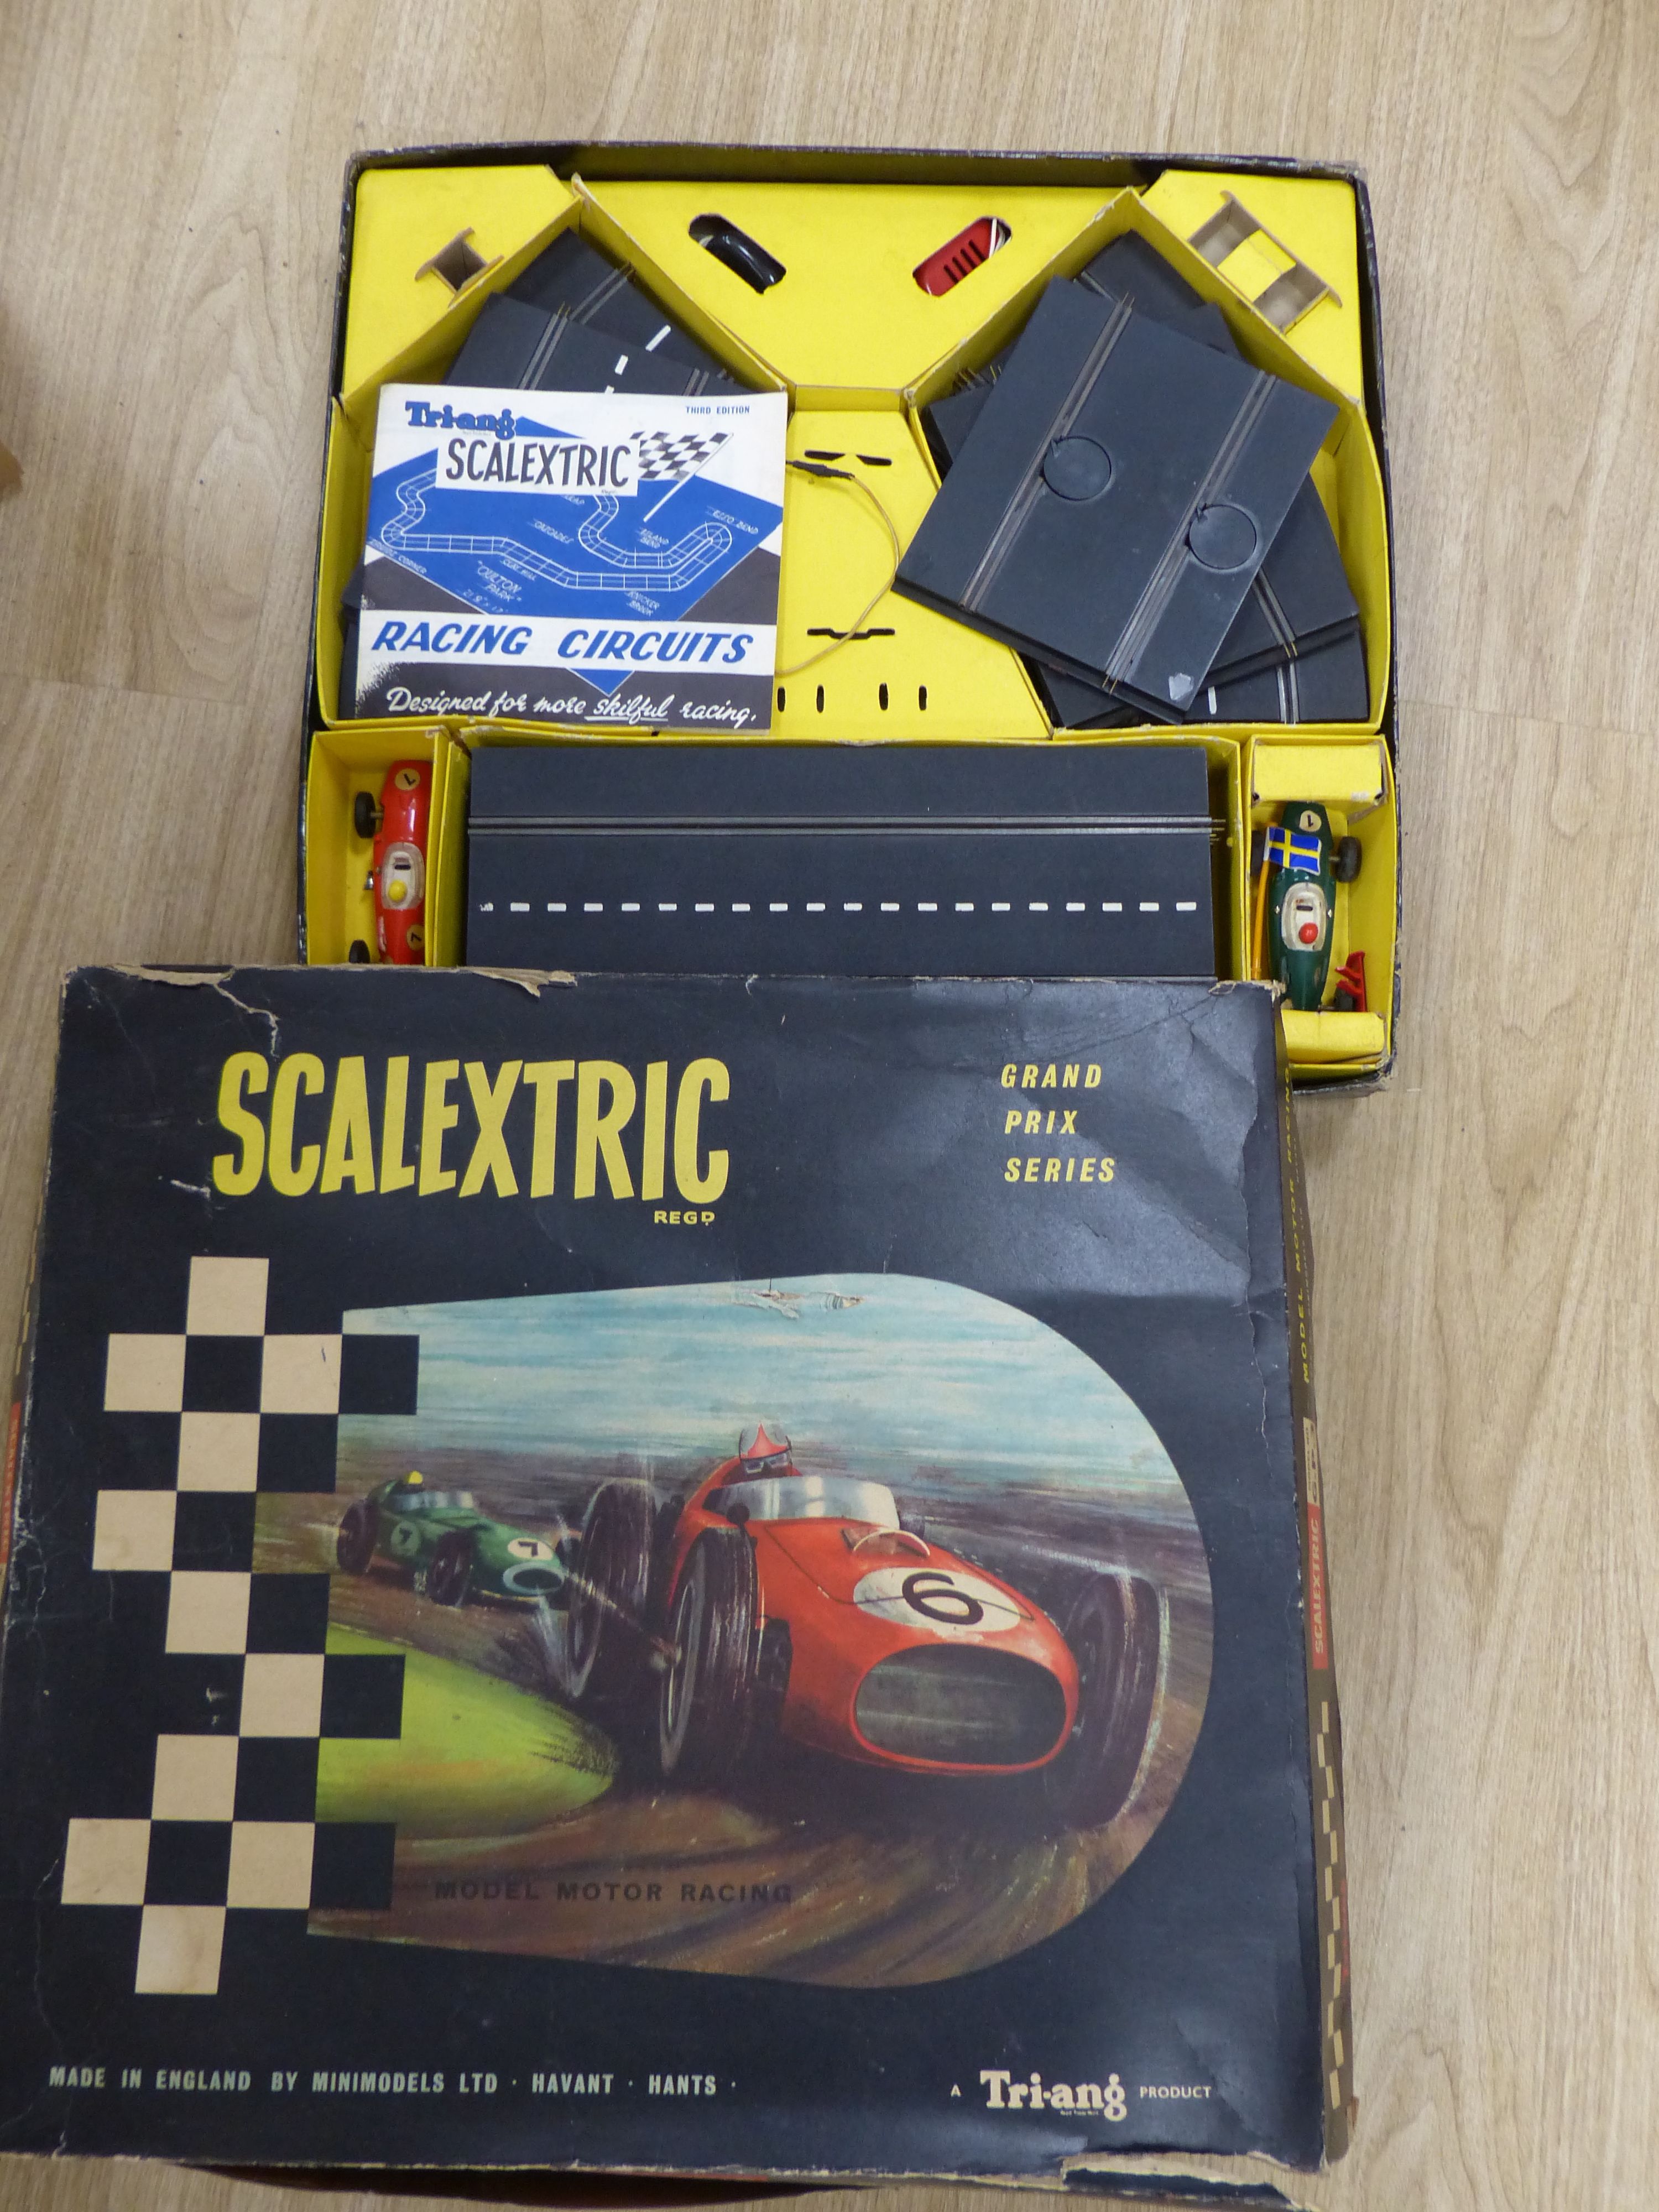 A quantity of Scalextric and accessories